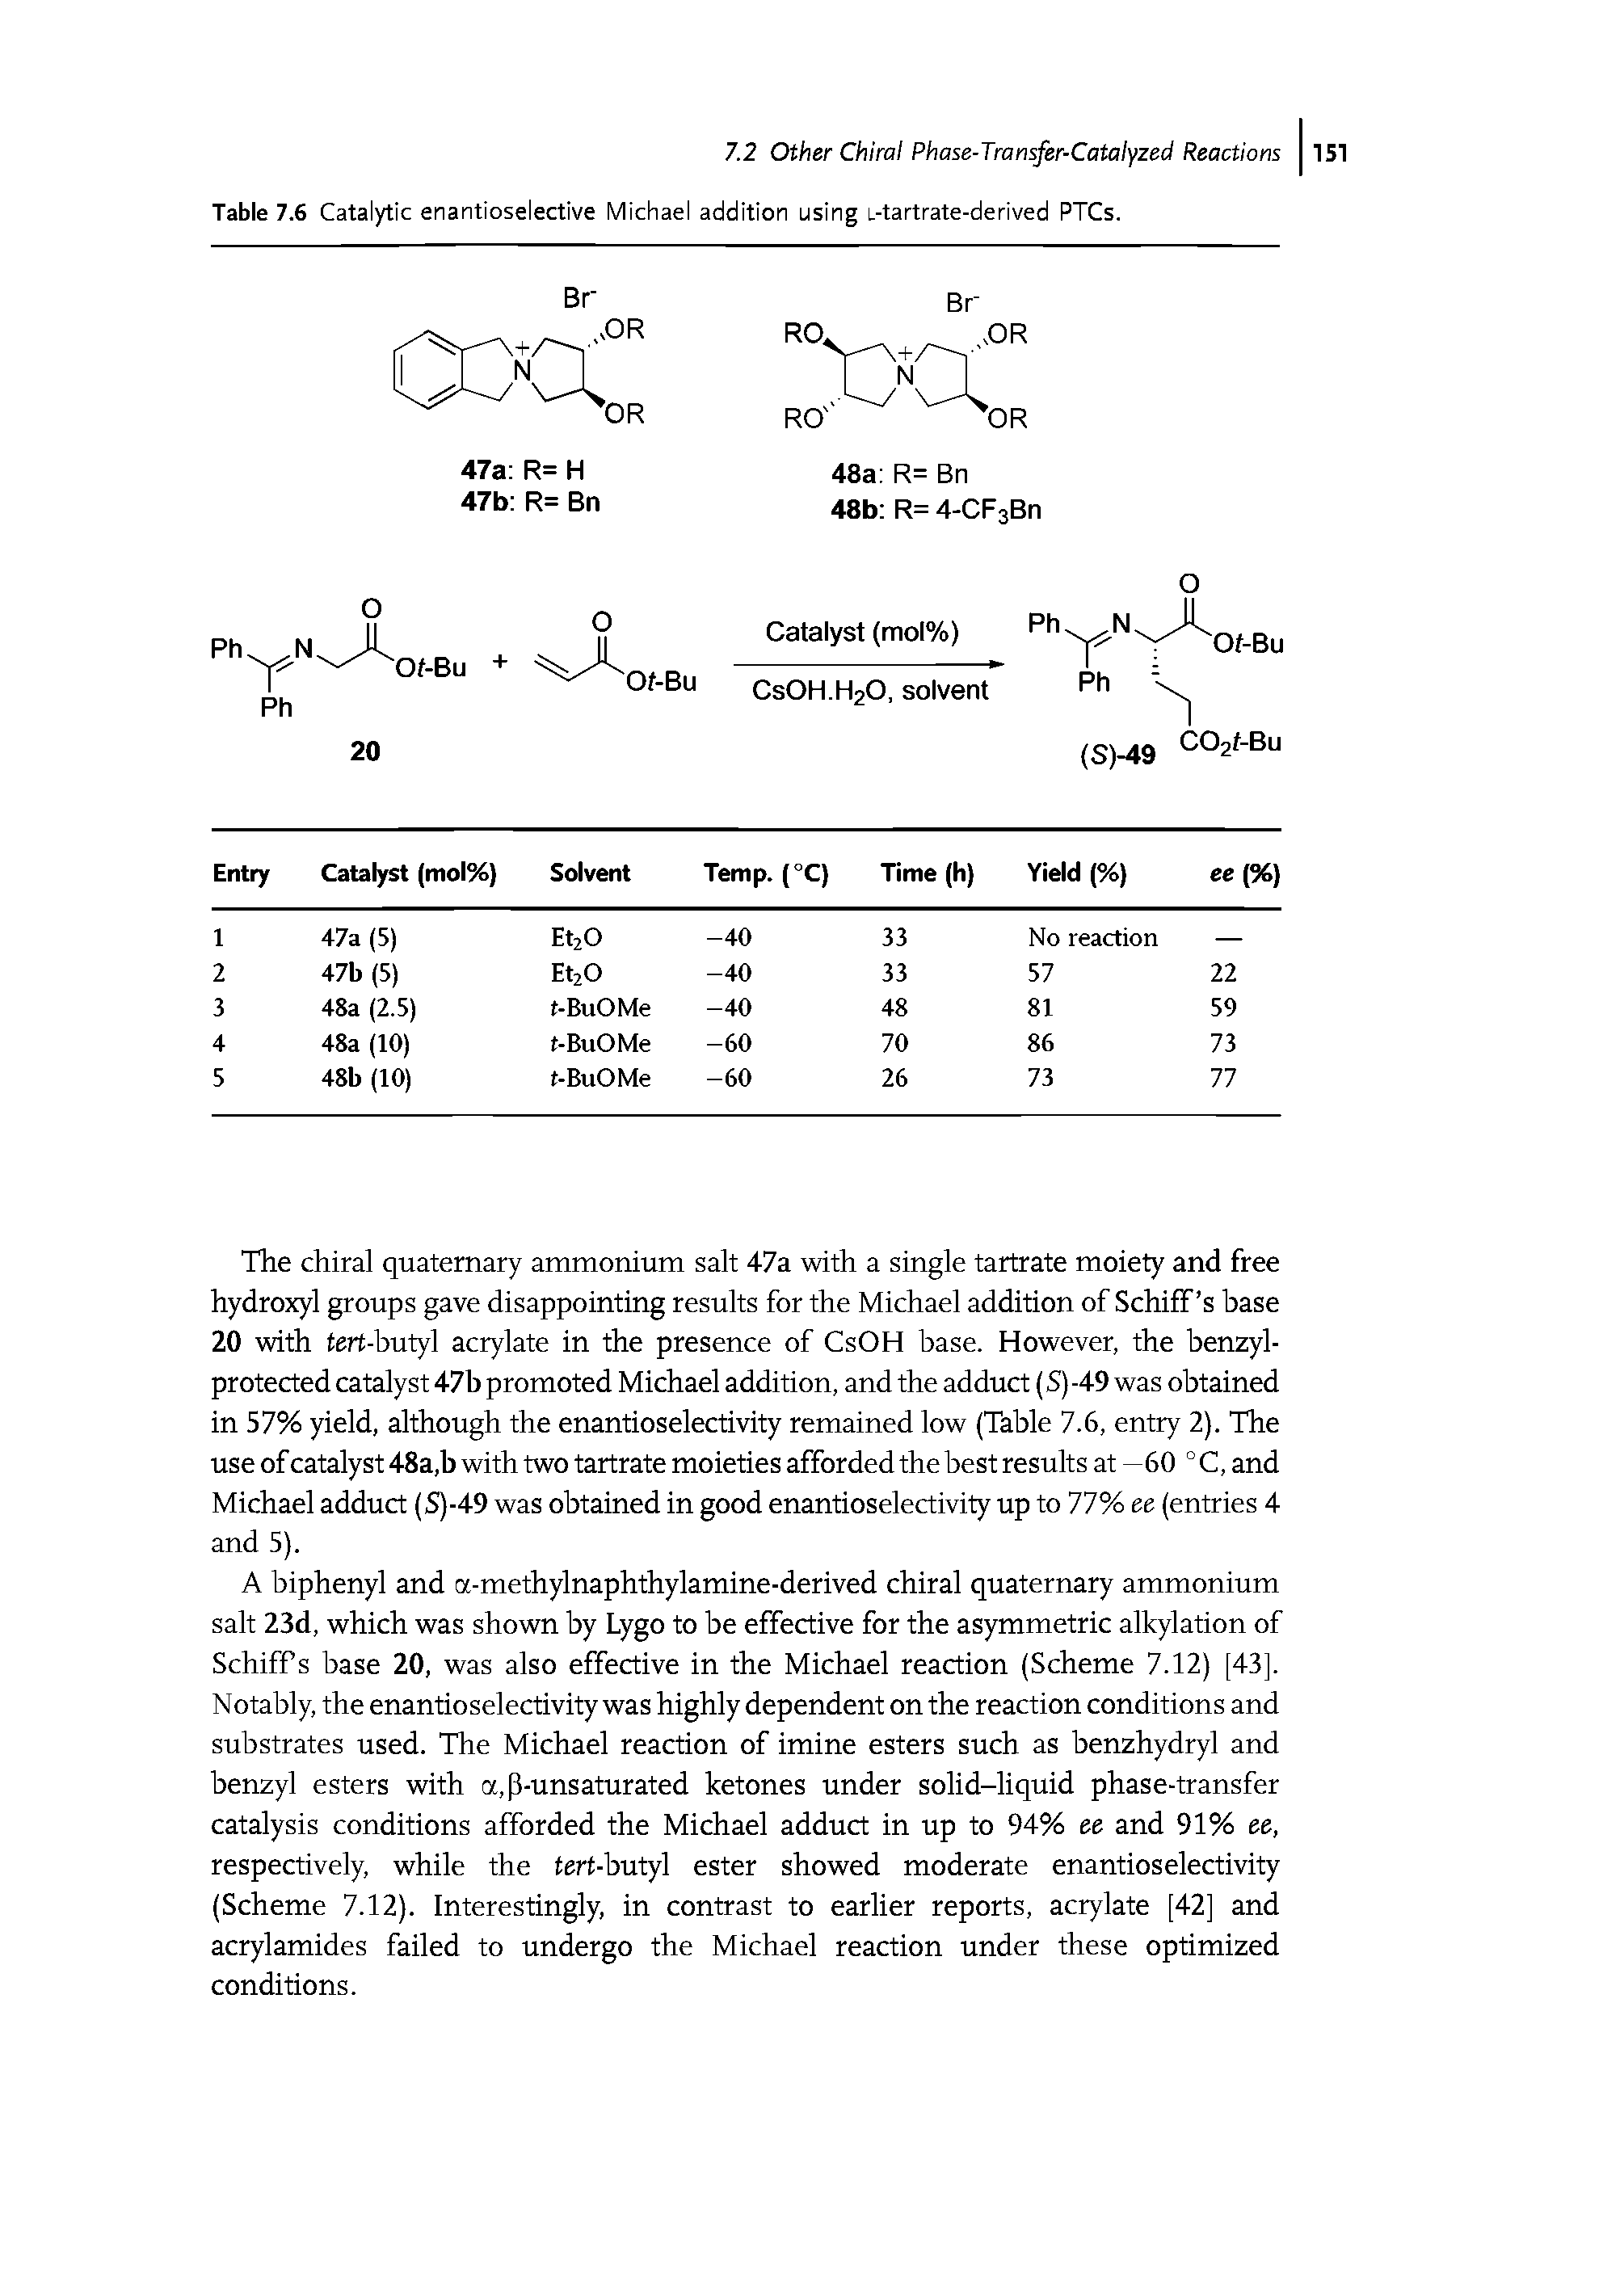 Table 7.6 Catalytic enantioselective Michael addition using L-tartrate-derived PTCs.